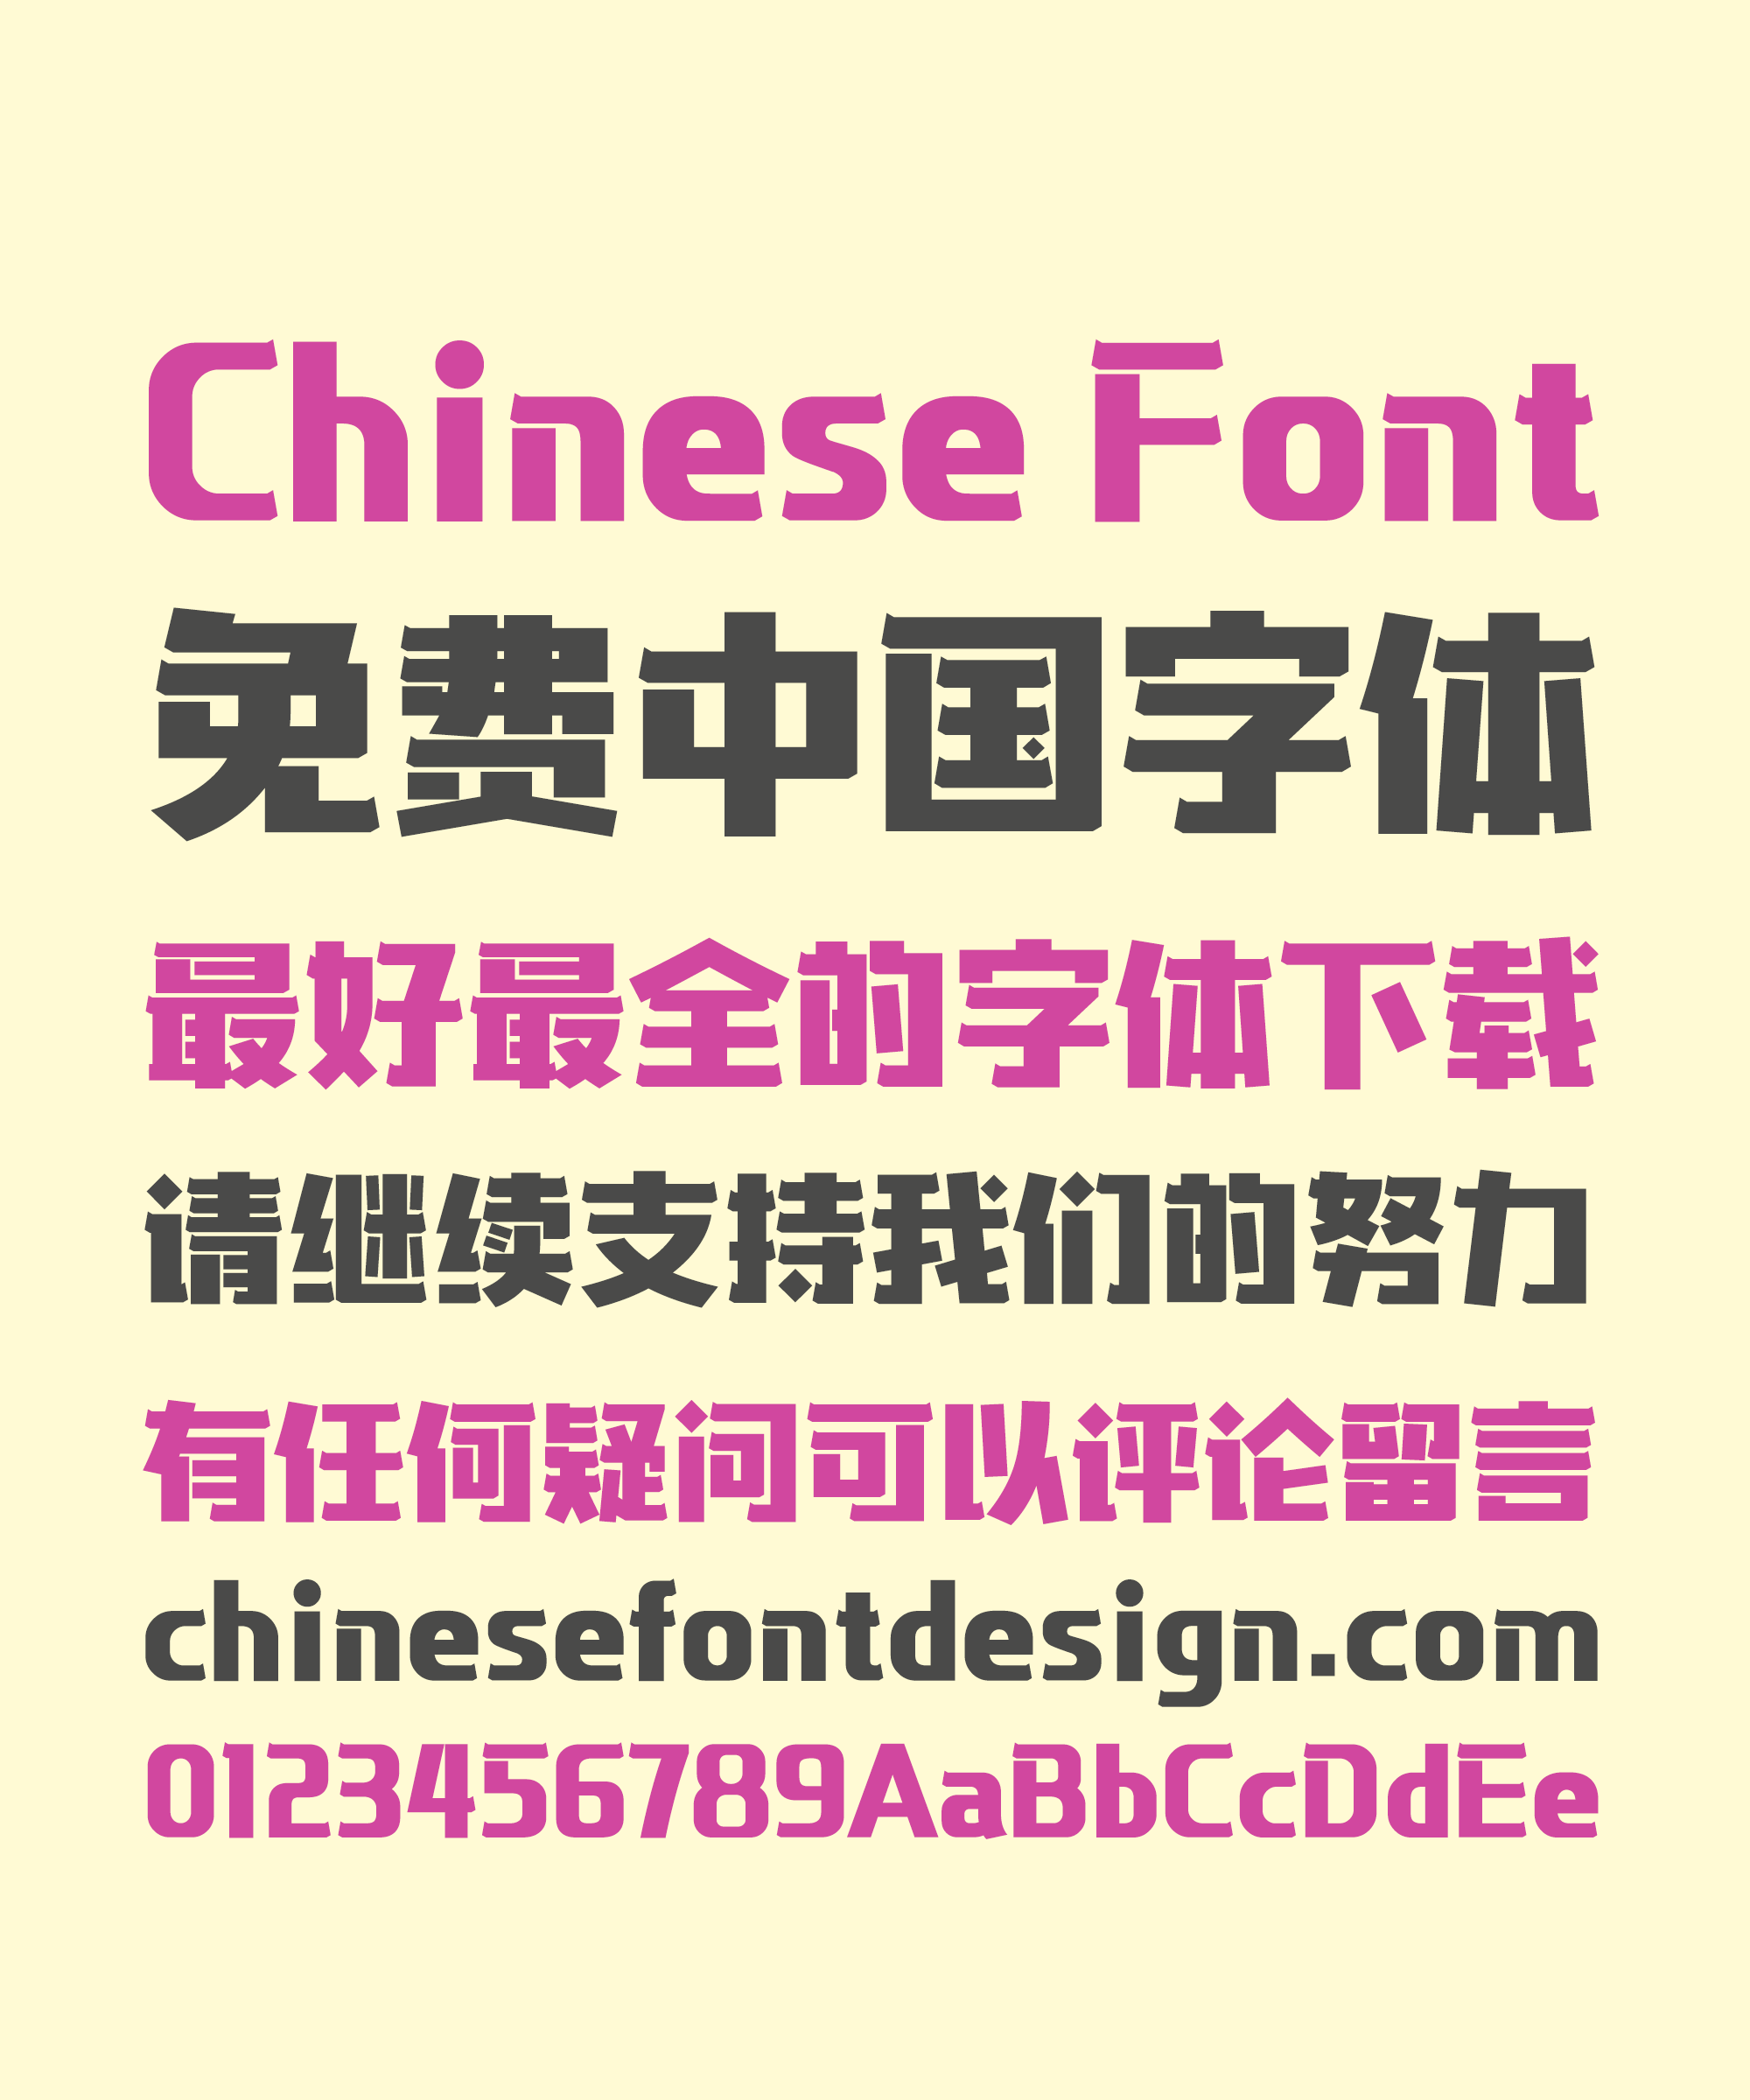 indesign chinese font styles